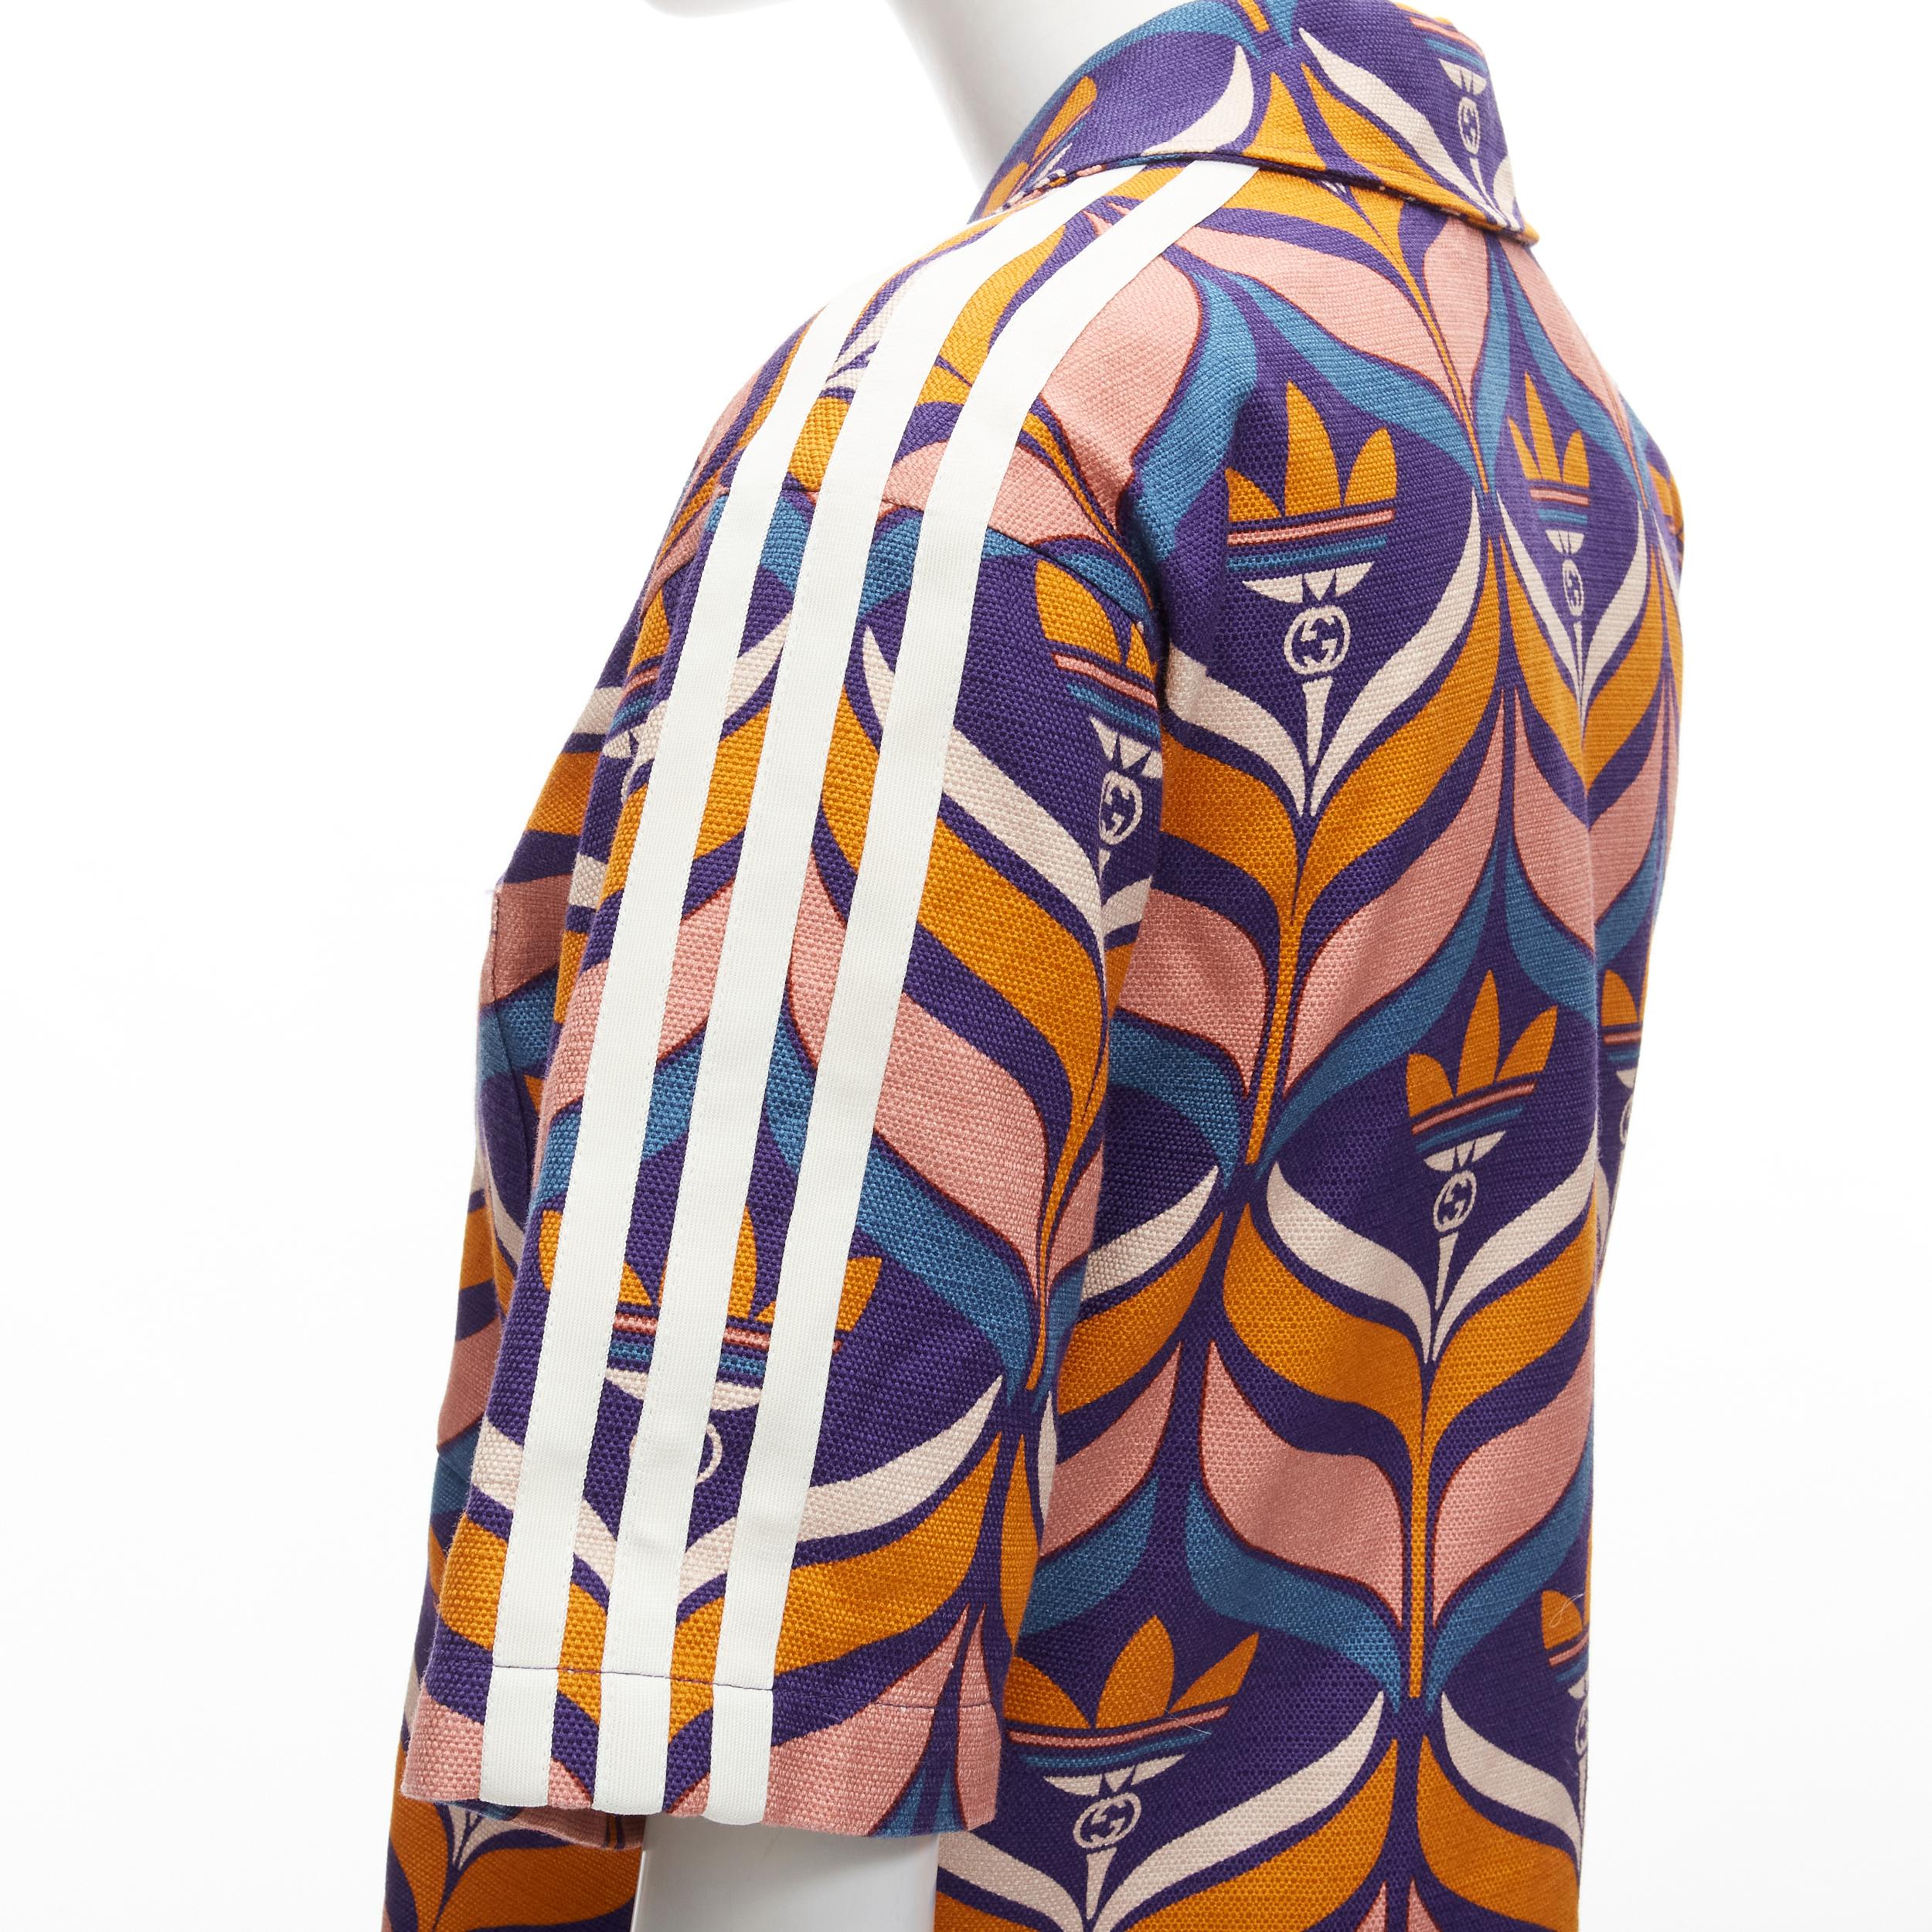 GUCCI ADIDAS 2022 Trefoil logo print cotton bowling shirt IT38
Brand: Gucci
Designer: Alessandro Michele
Collection: Adidas Collaboration 
Material: Cotton
Color: Blue
Pattern: Abstract
Closure: Button
Extra Detail: Trefoil print mixed with Adidas